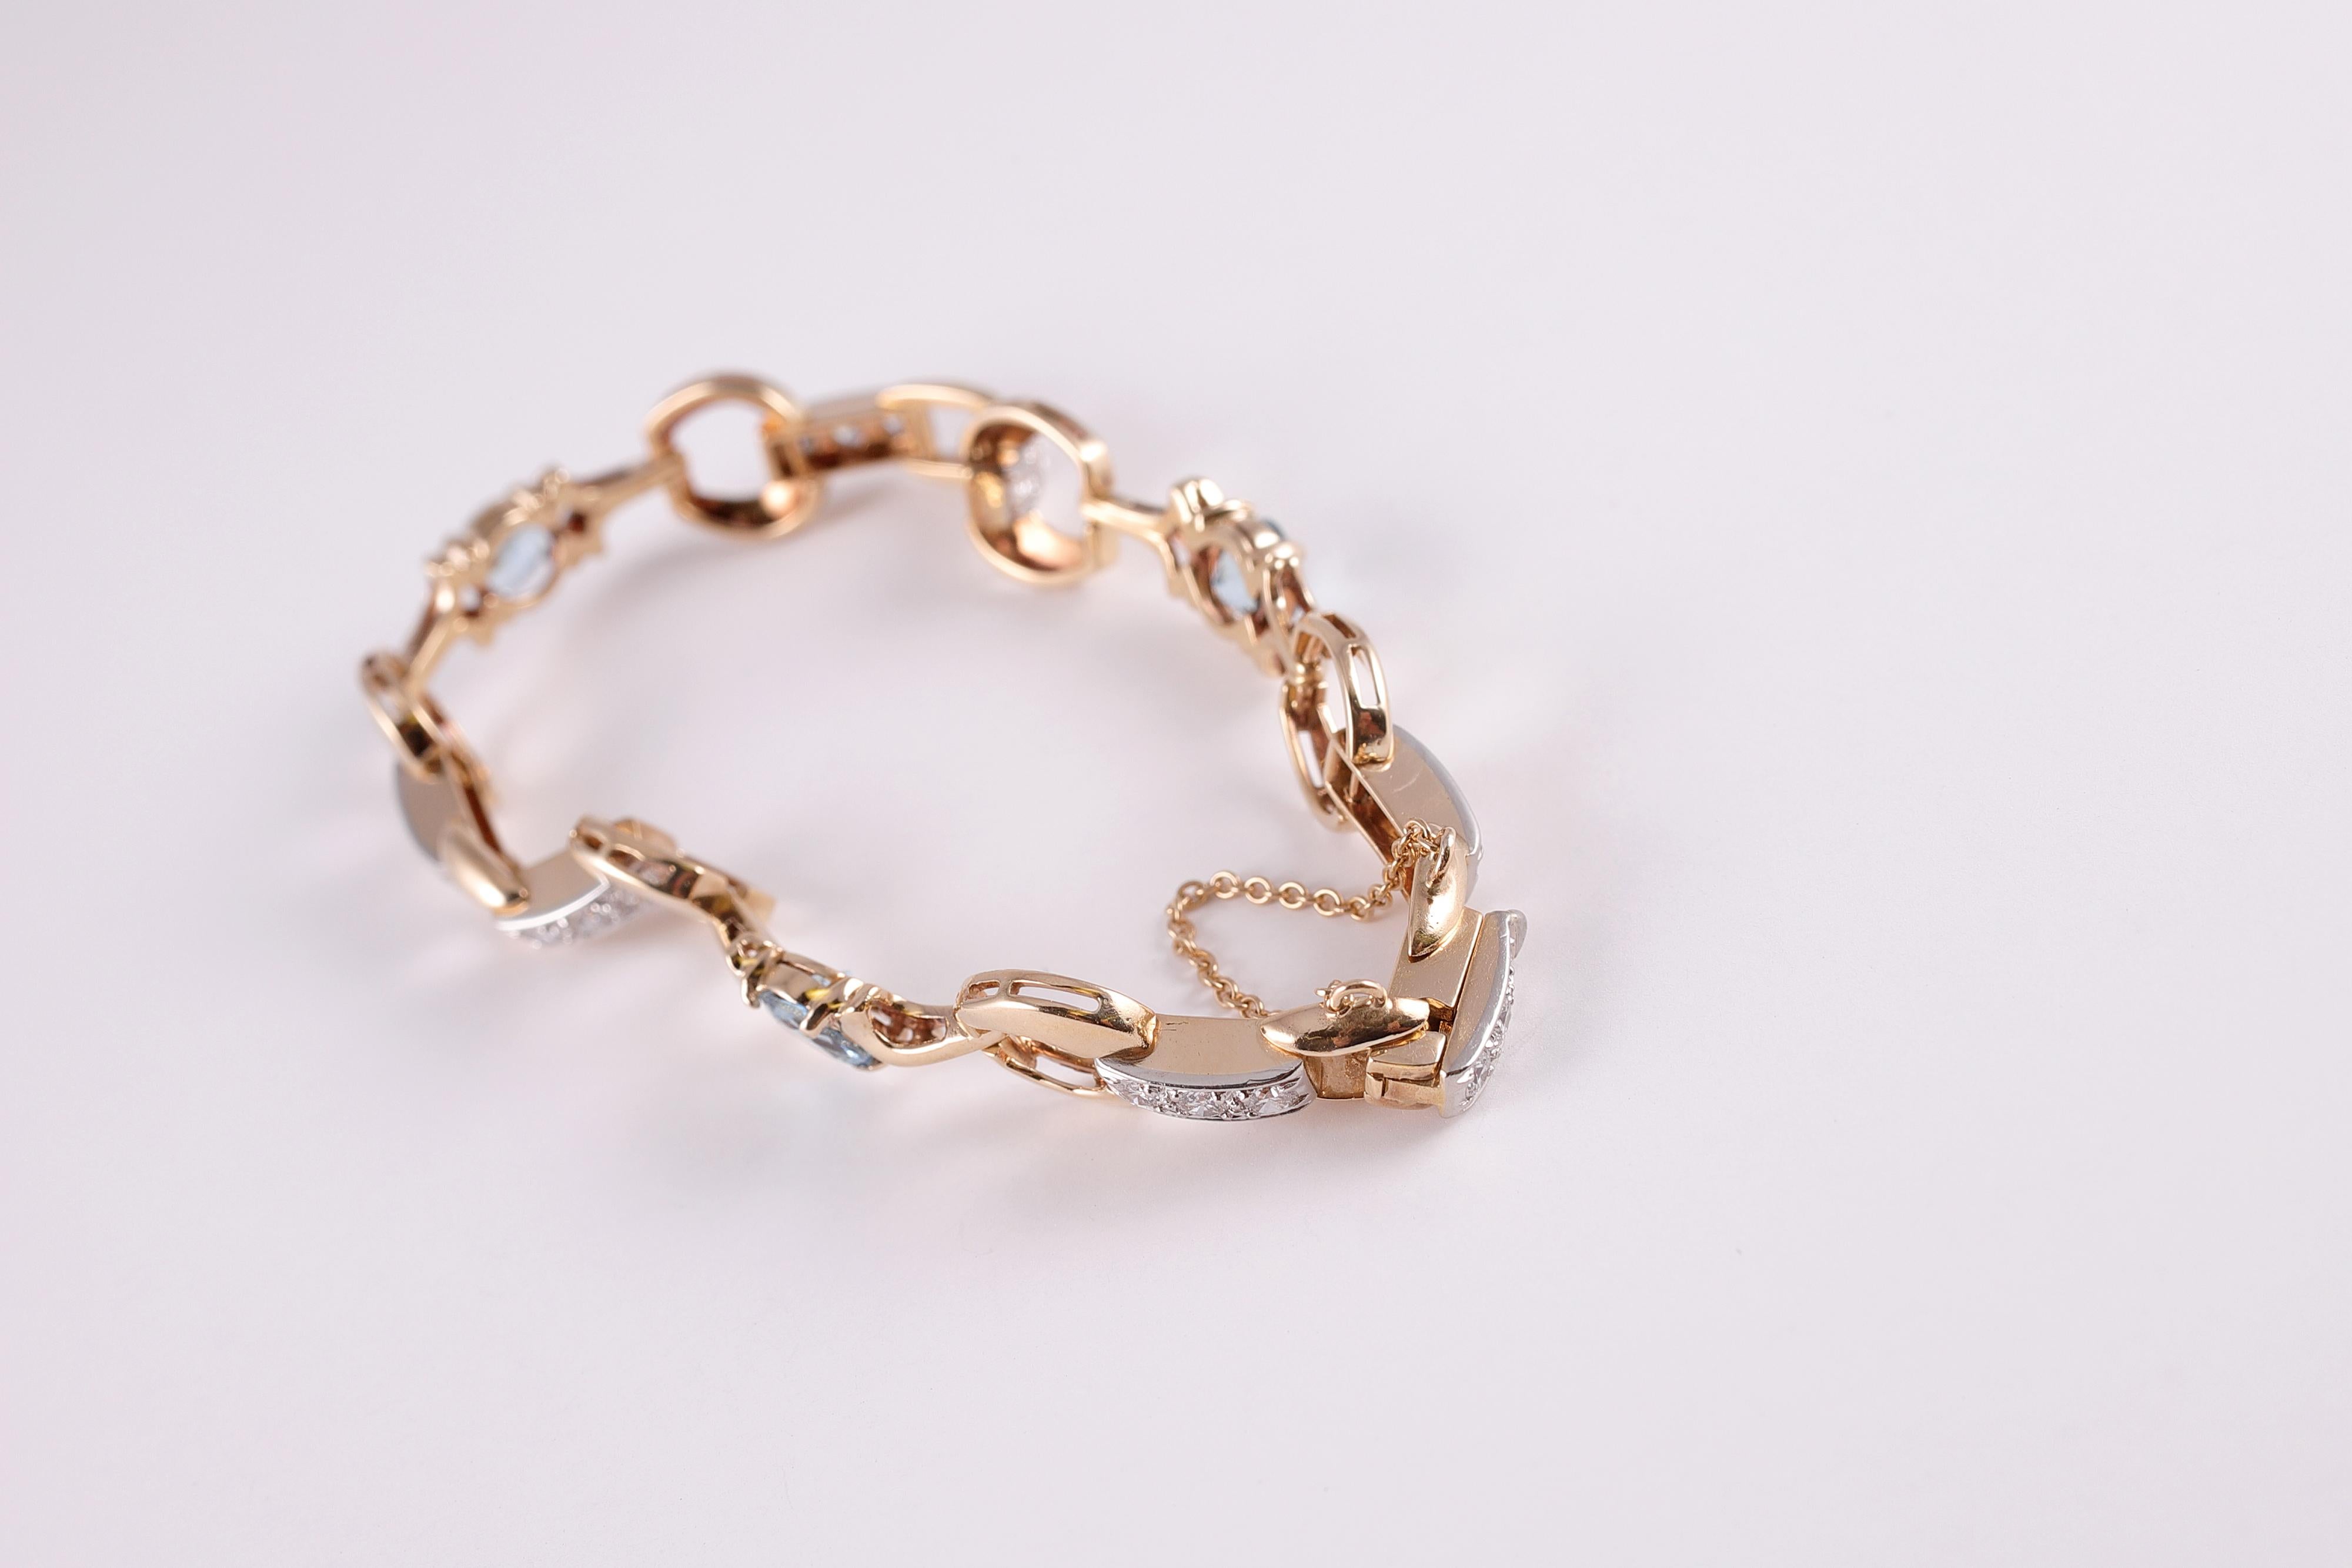 Dazzling bracelet with 2.18 carats of lovely aquamarines and 1.05 carats of channel set diamonds -- all in 14 Karat yellow gold and palladium.  Light and lovely!!